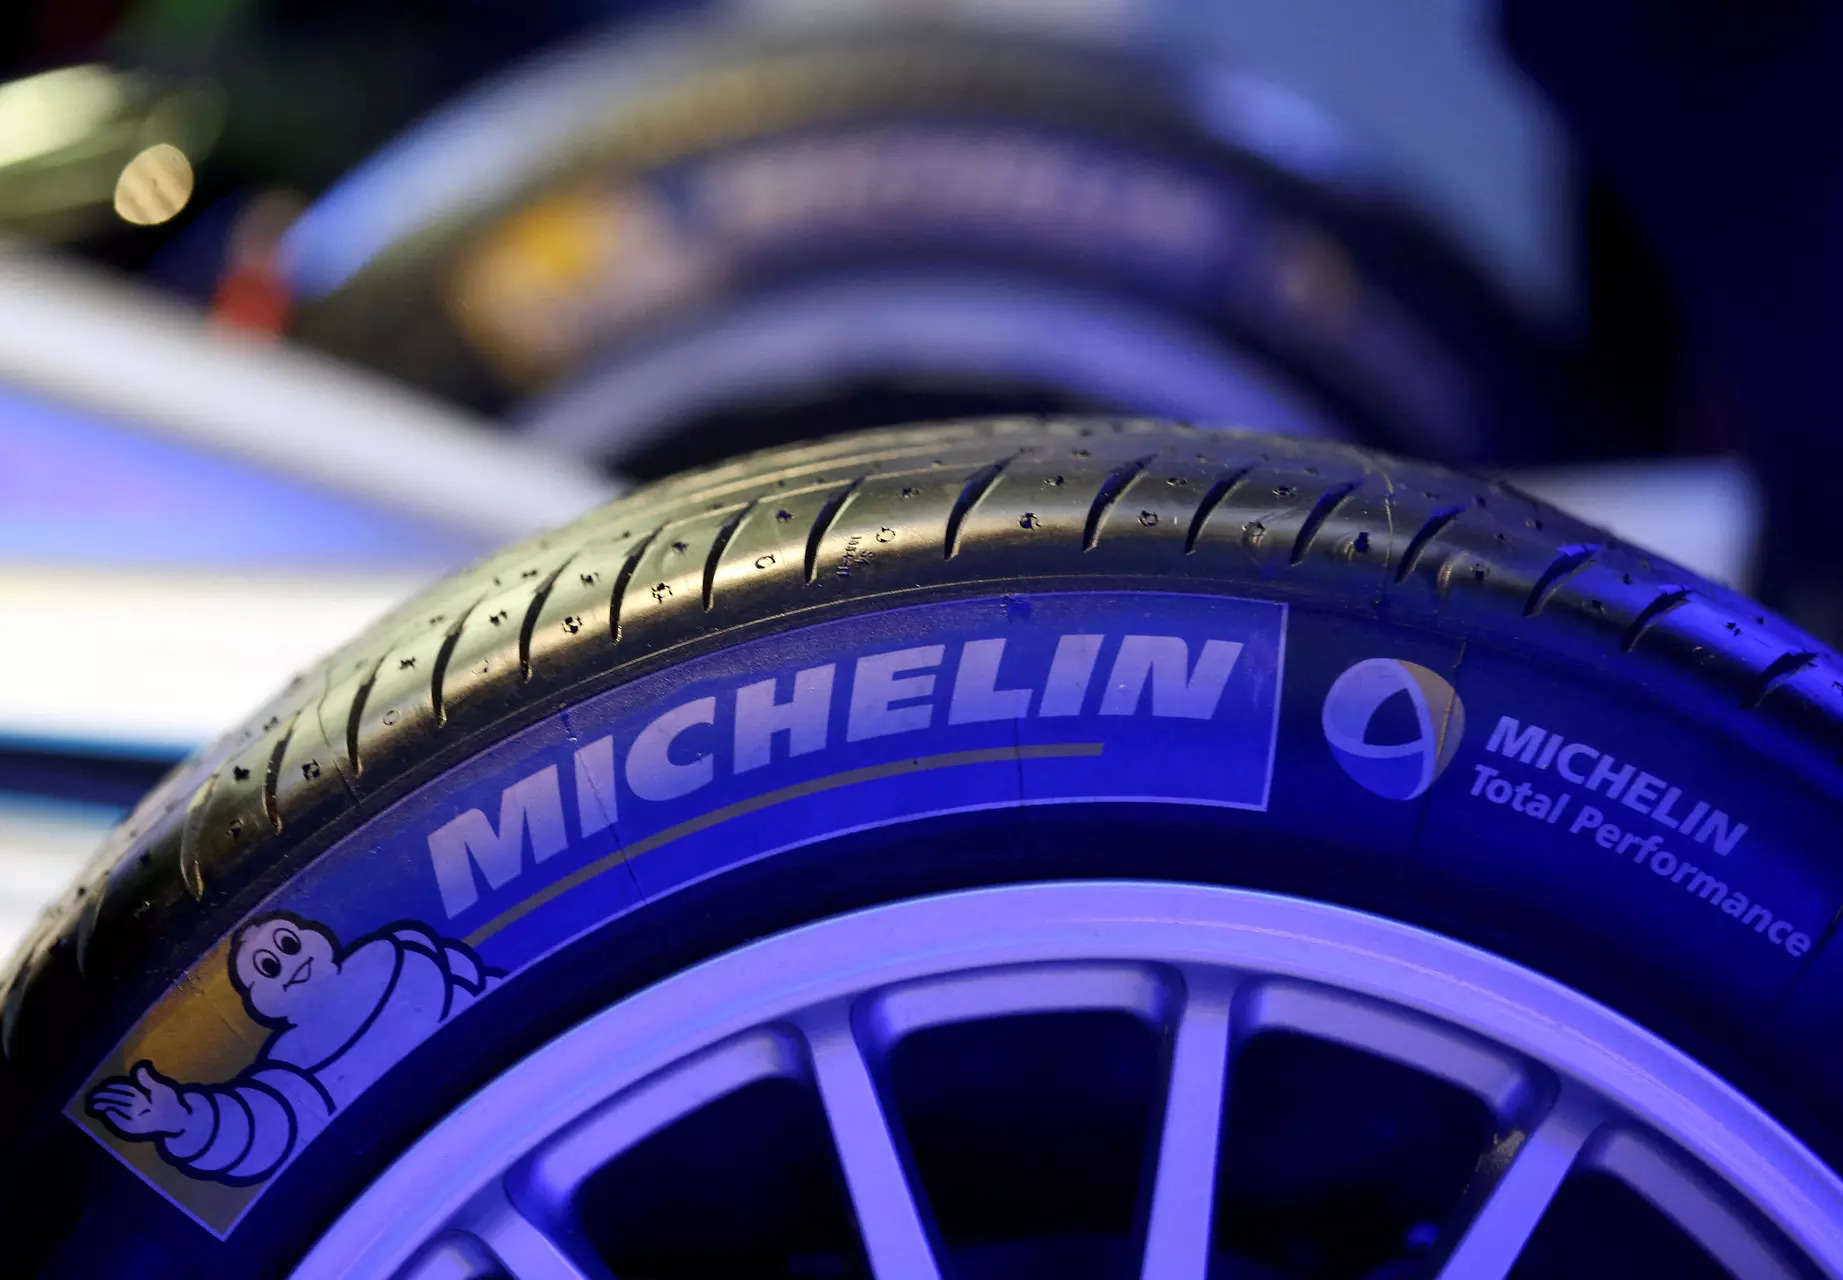 Michelin suspending production at some European plants